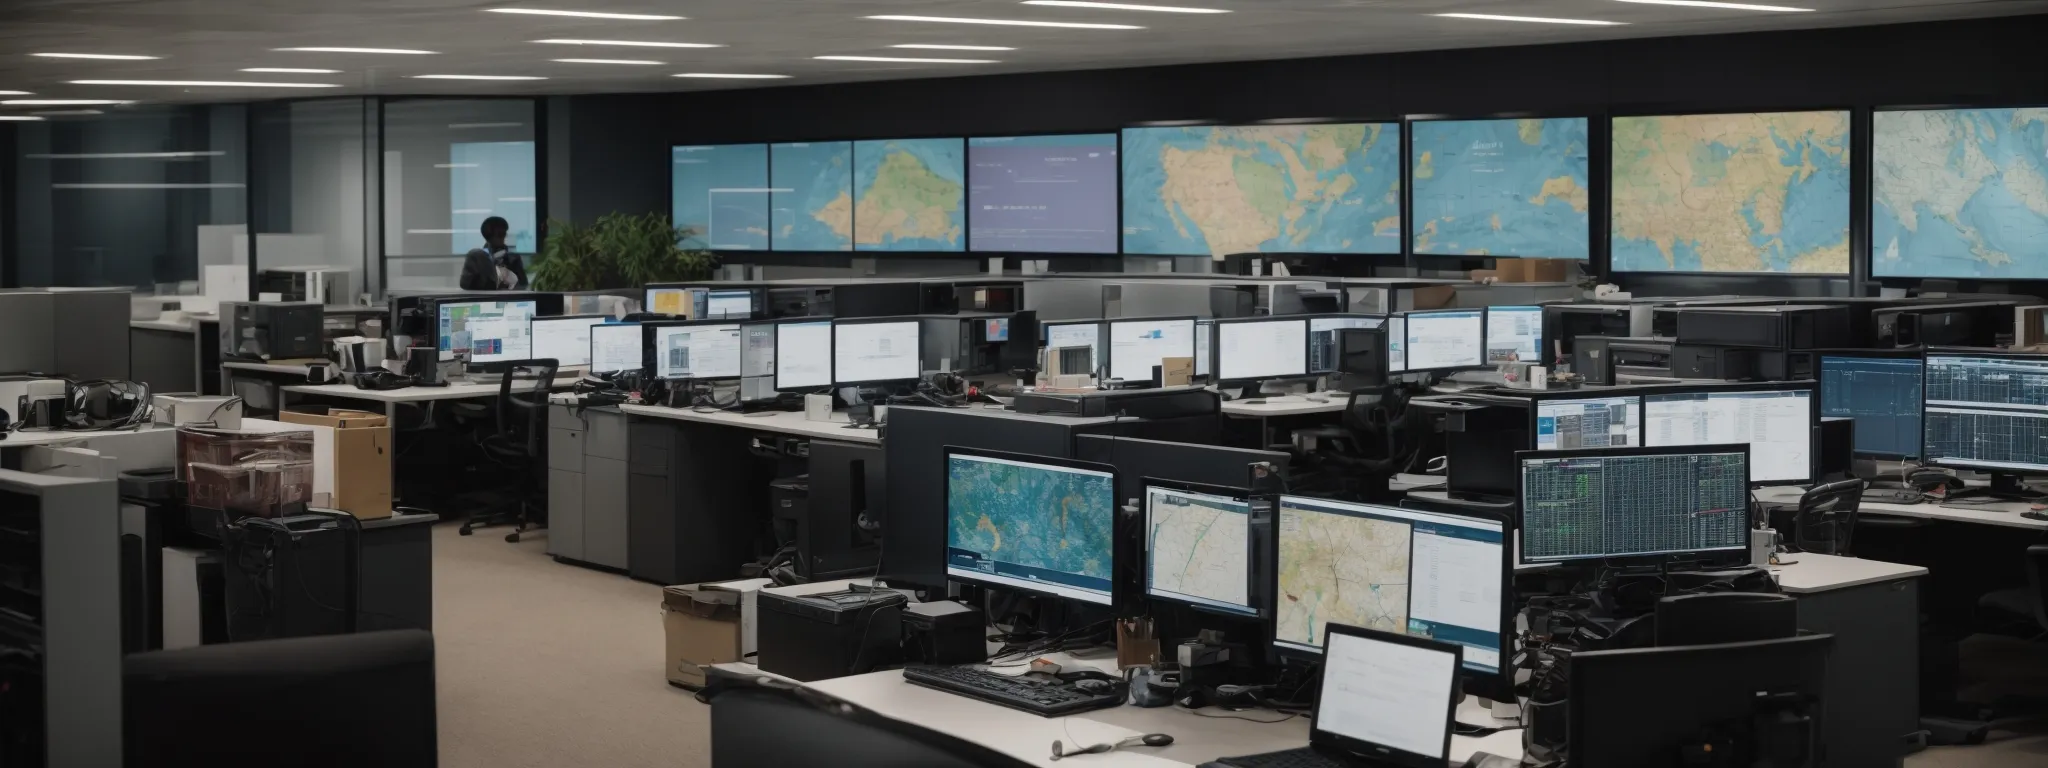 a tidy office with multiple computer screens displaying colorful analytics and a visible map highlighting various geographic locations.